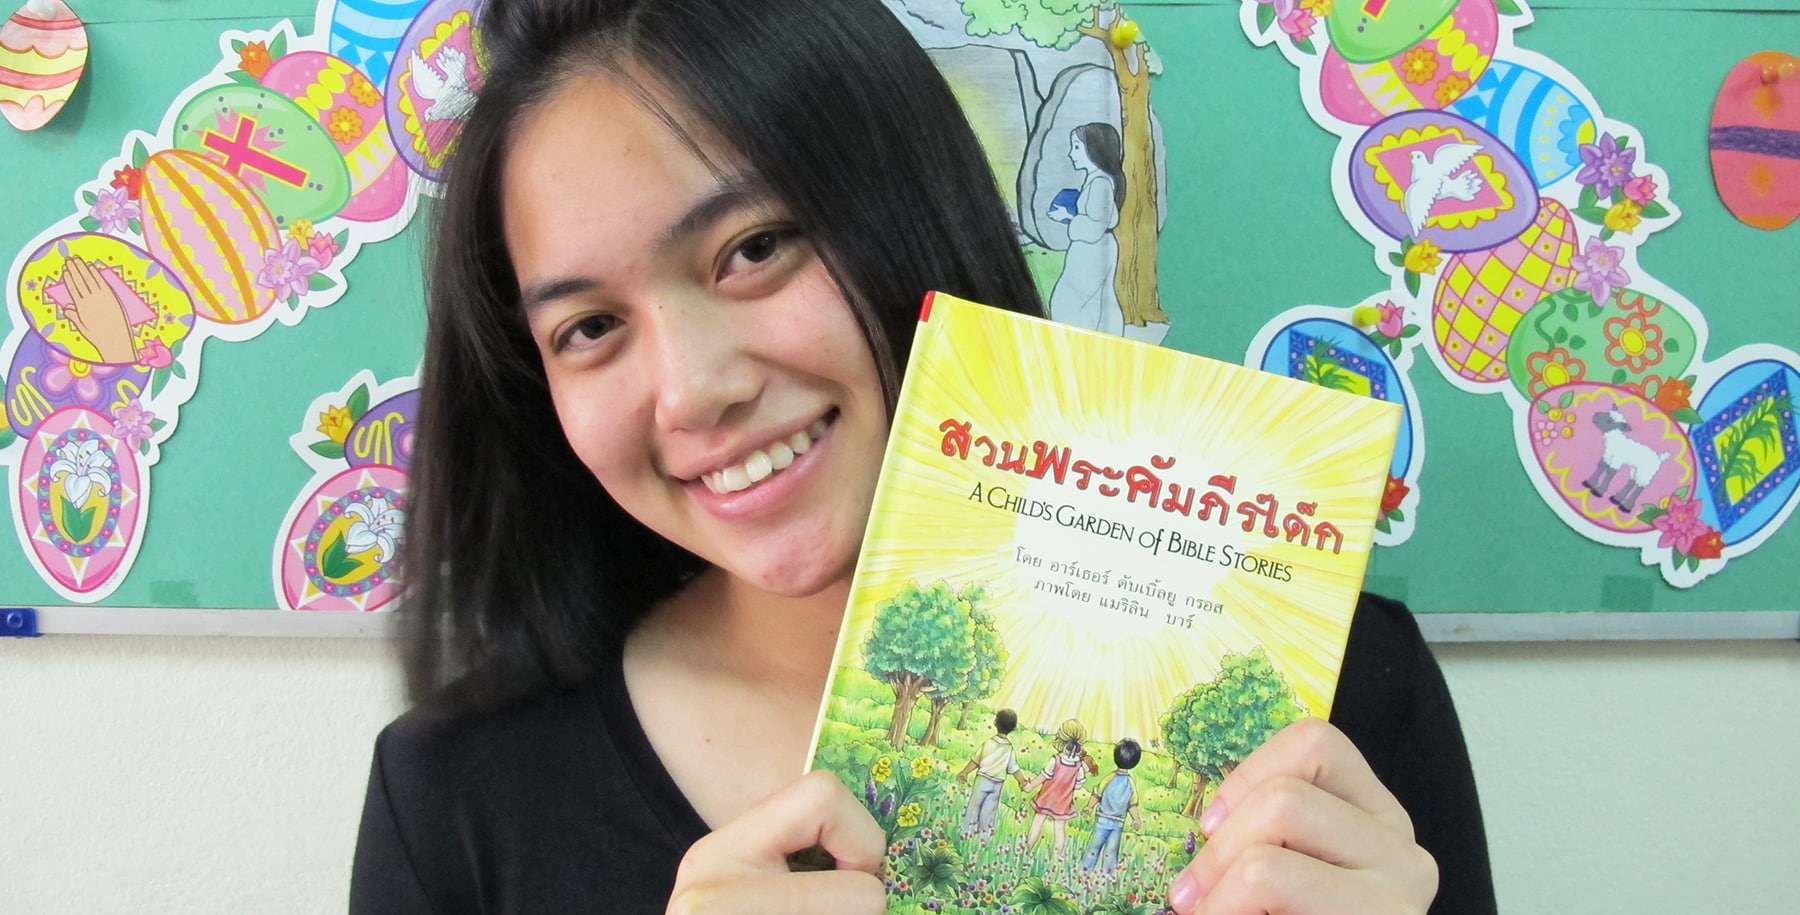 Thai Teen Holding Up A Child's Garden of Bible Storybooks